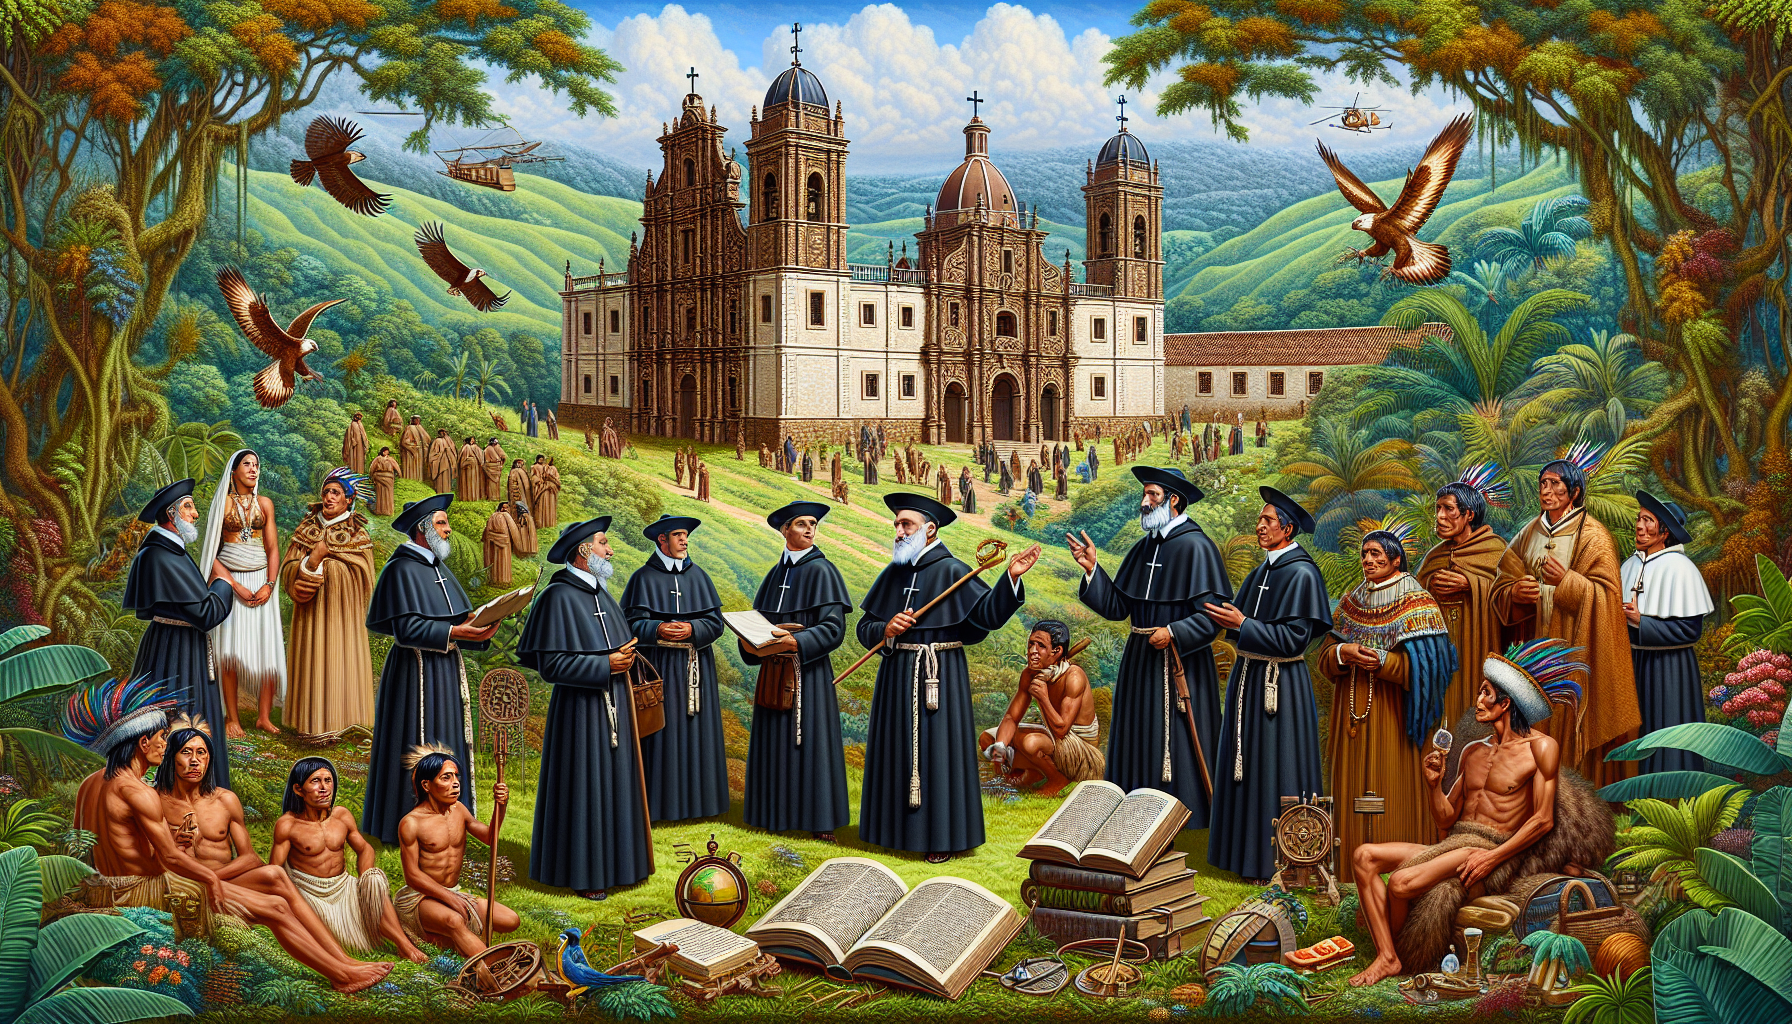 A detailed painting of Jesuit missionaries from the 16th century, dressed in traditional black robes, teaching indigenous people in a lush South American landscape; in the background, a beautifully co